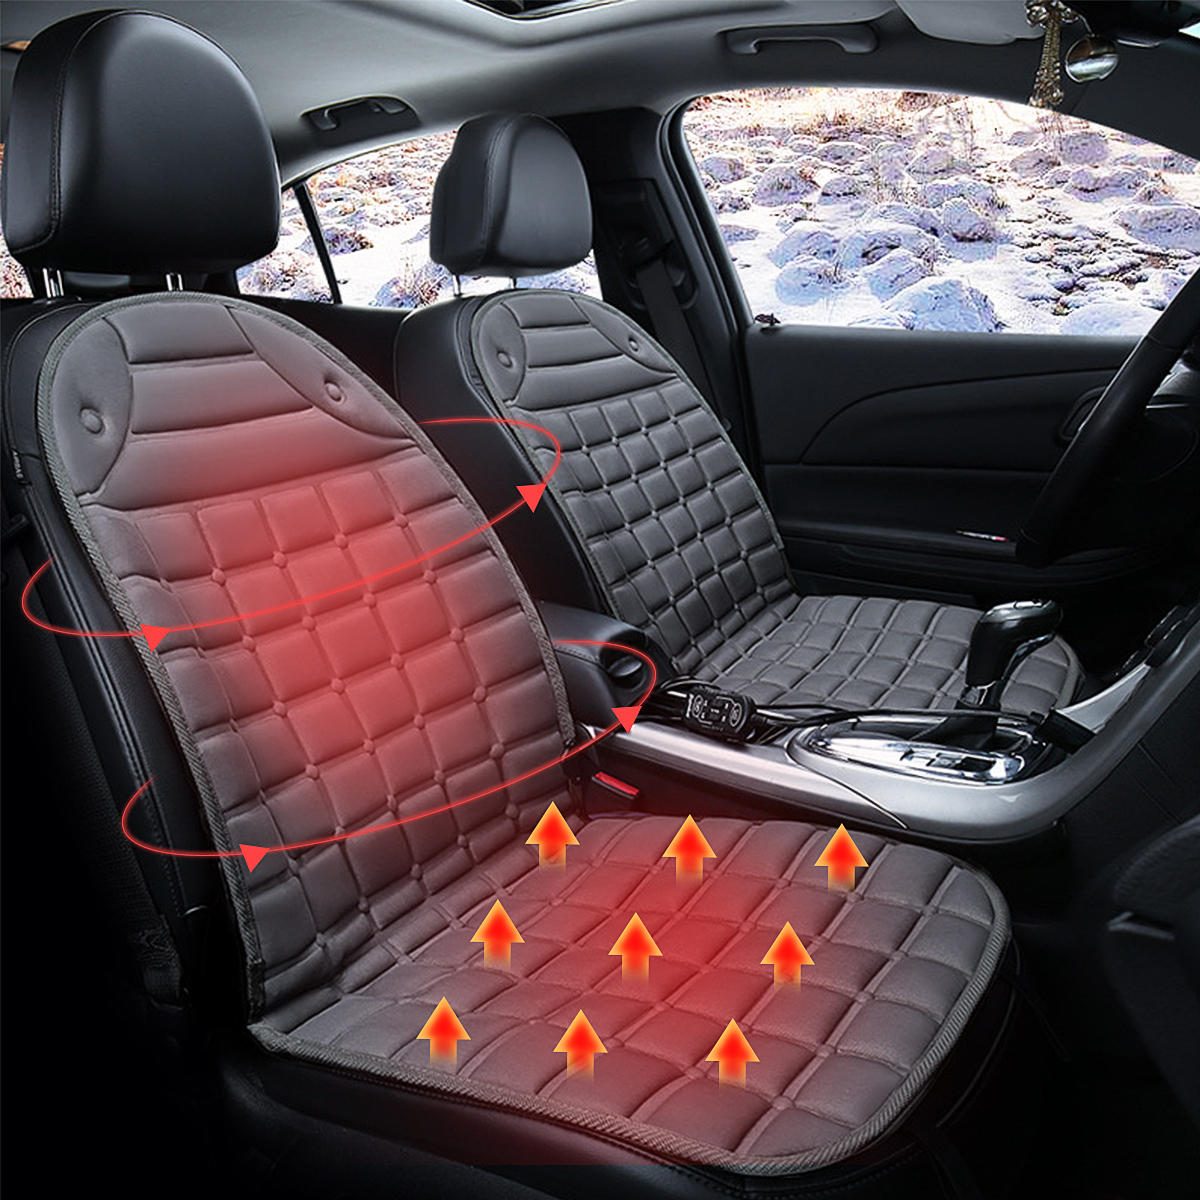 heated car seat cover argos,Free 